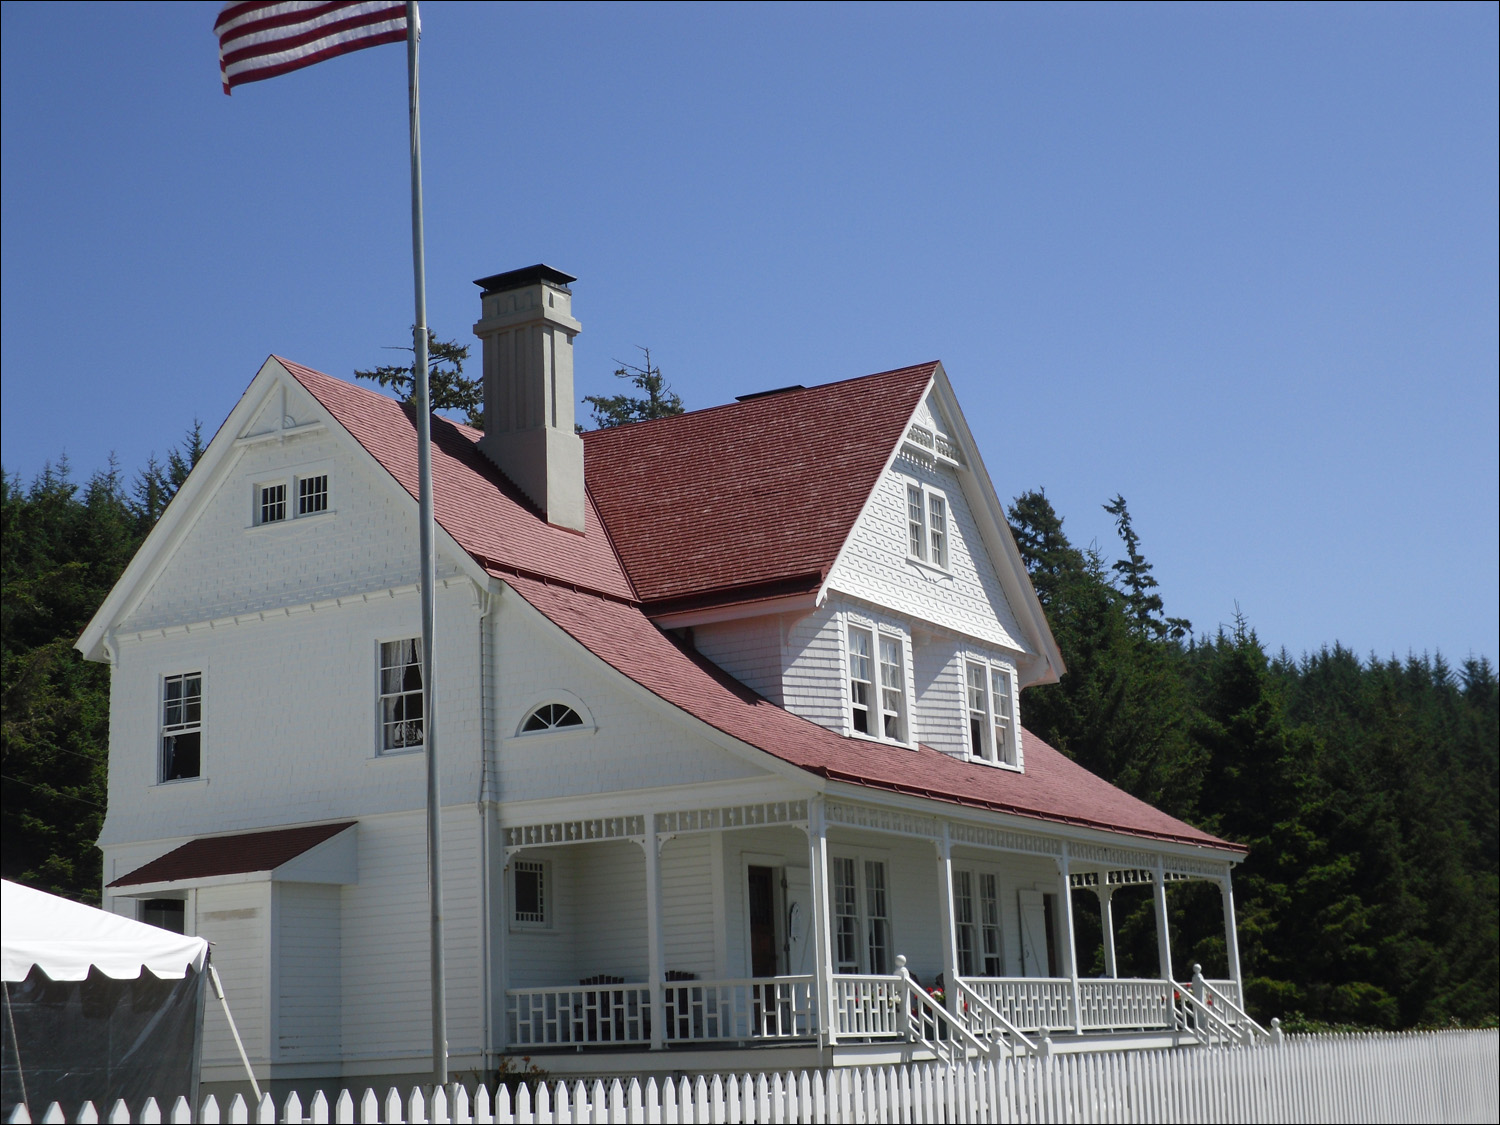 Yachats, OR- Photos taken at Heceta Lighthouse-lighthouse keeper's house, now a pricey B&B